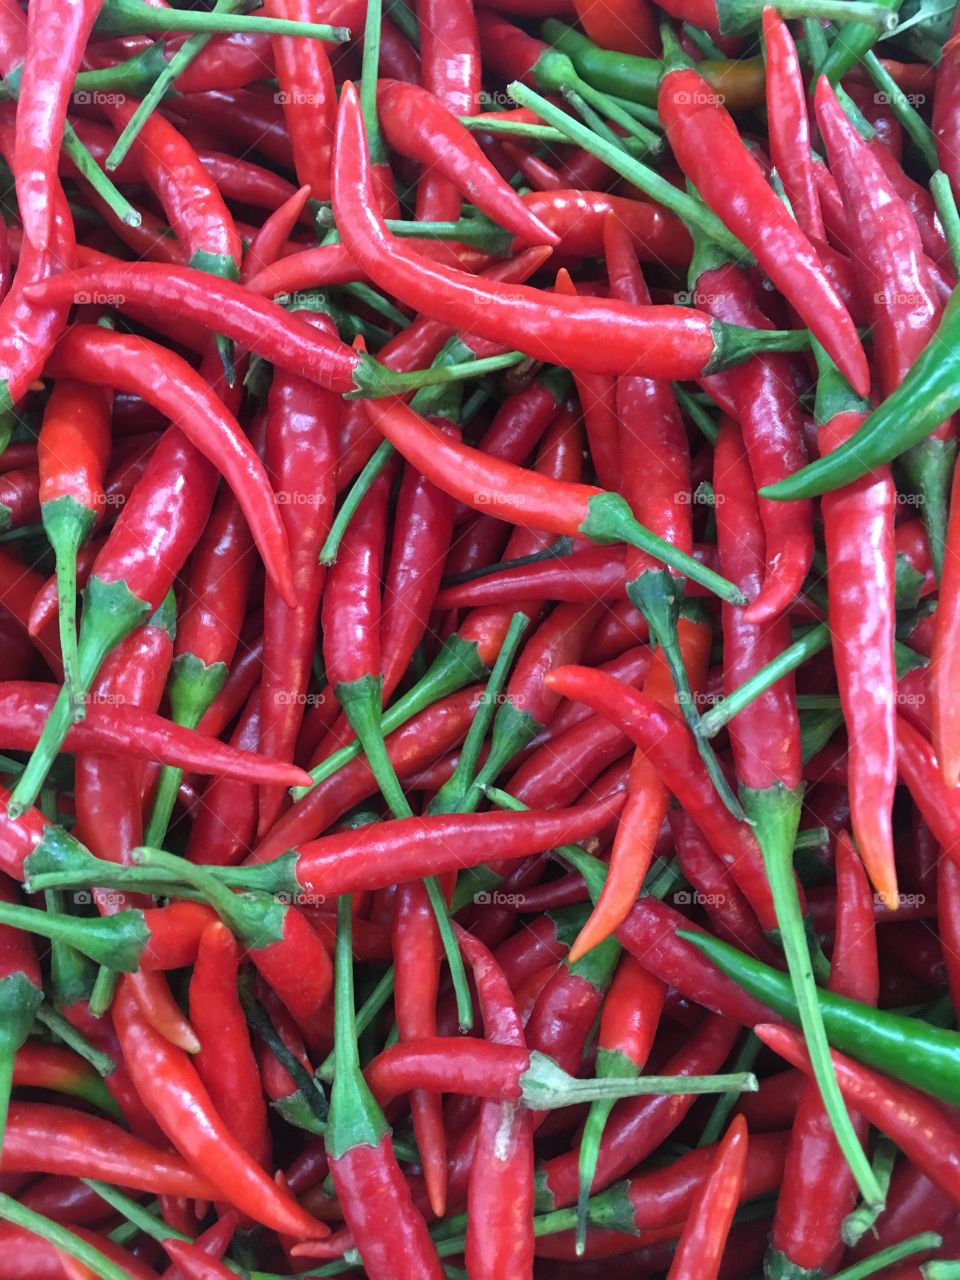 Red chili on the market